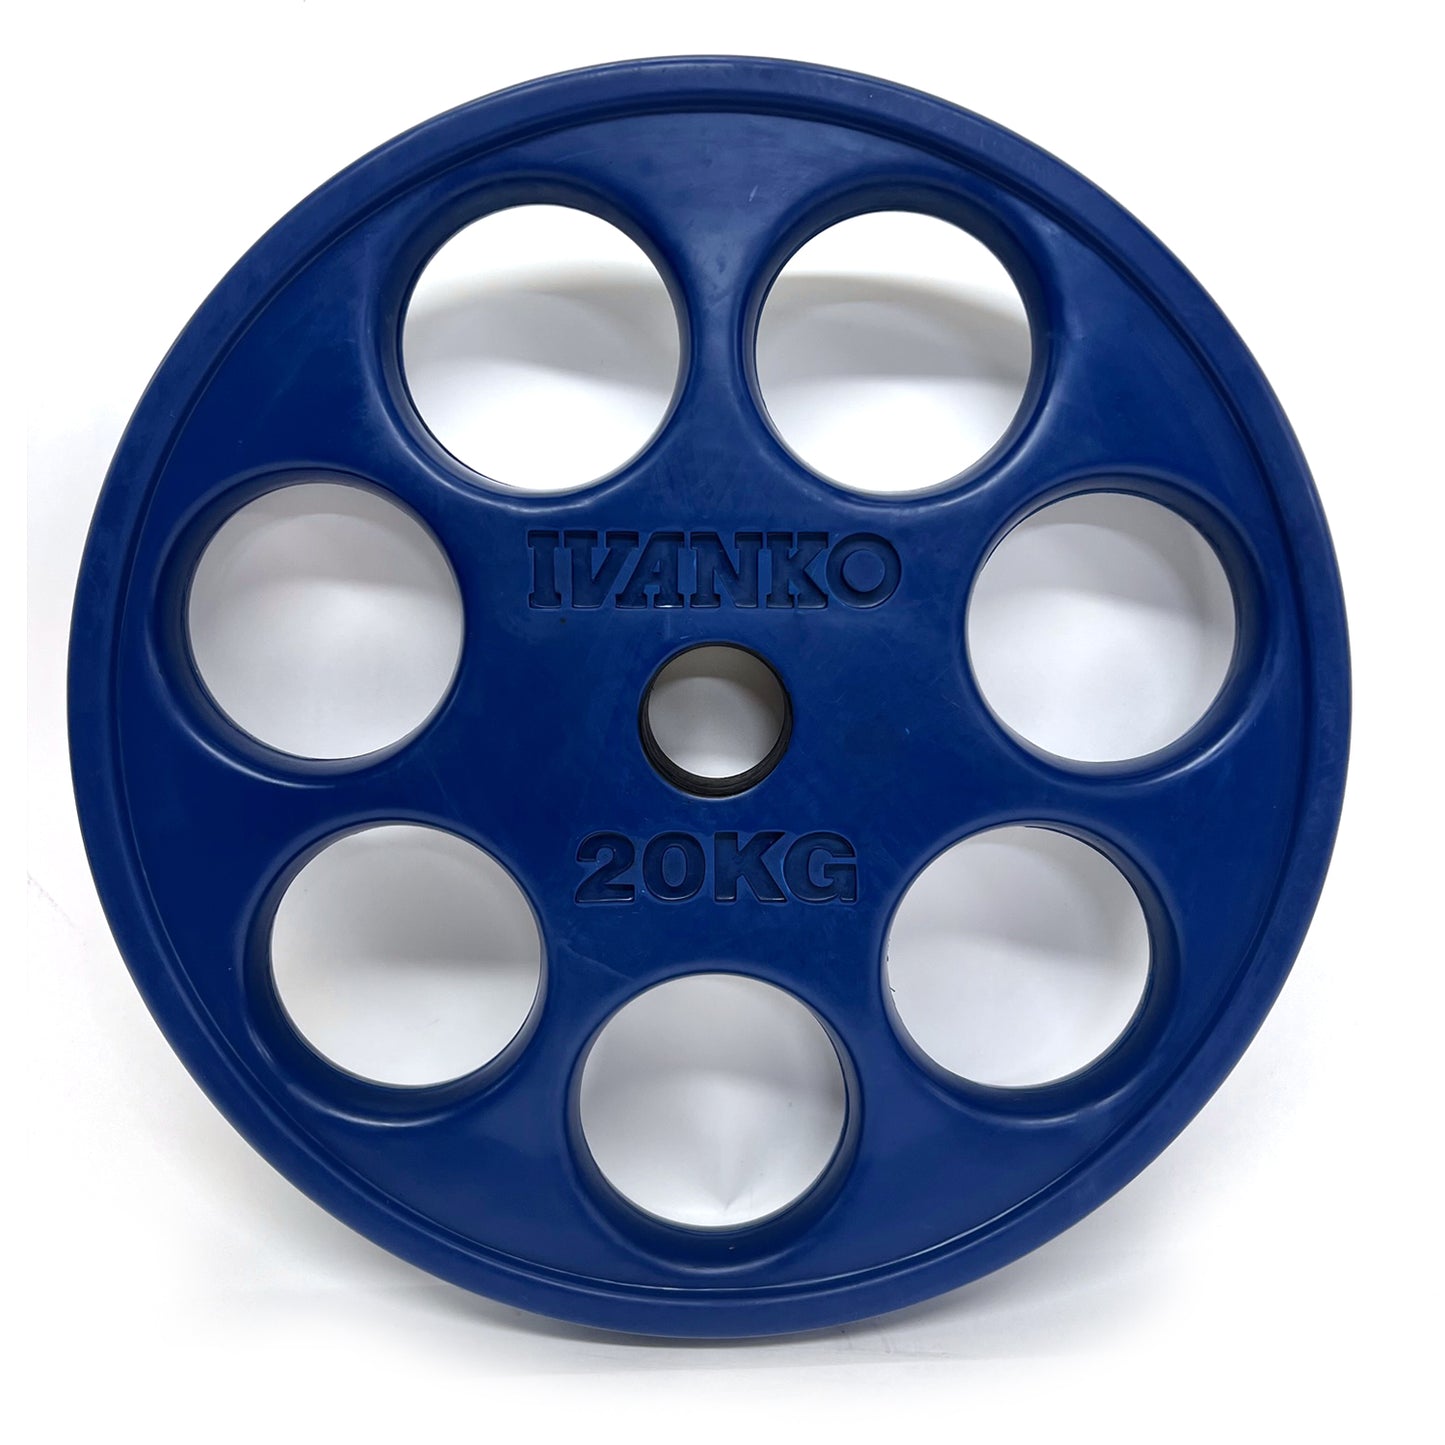 Rubber E-Z Lift Olympic Plate | ROEZH